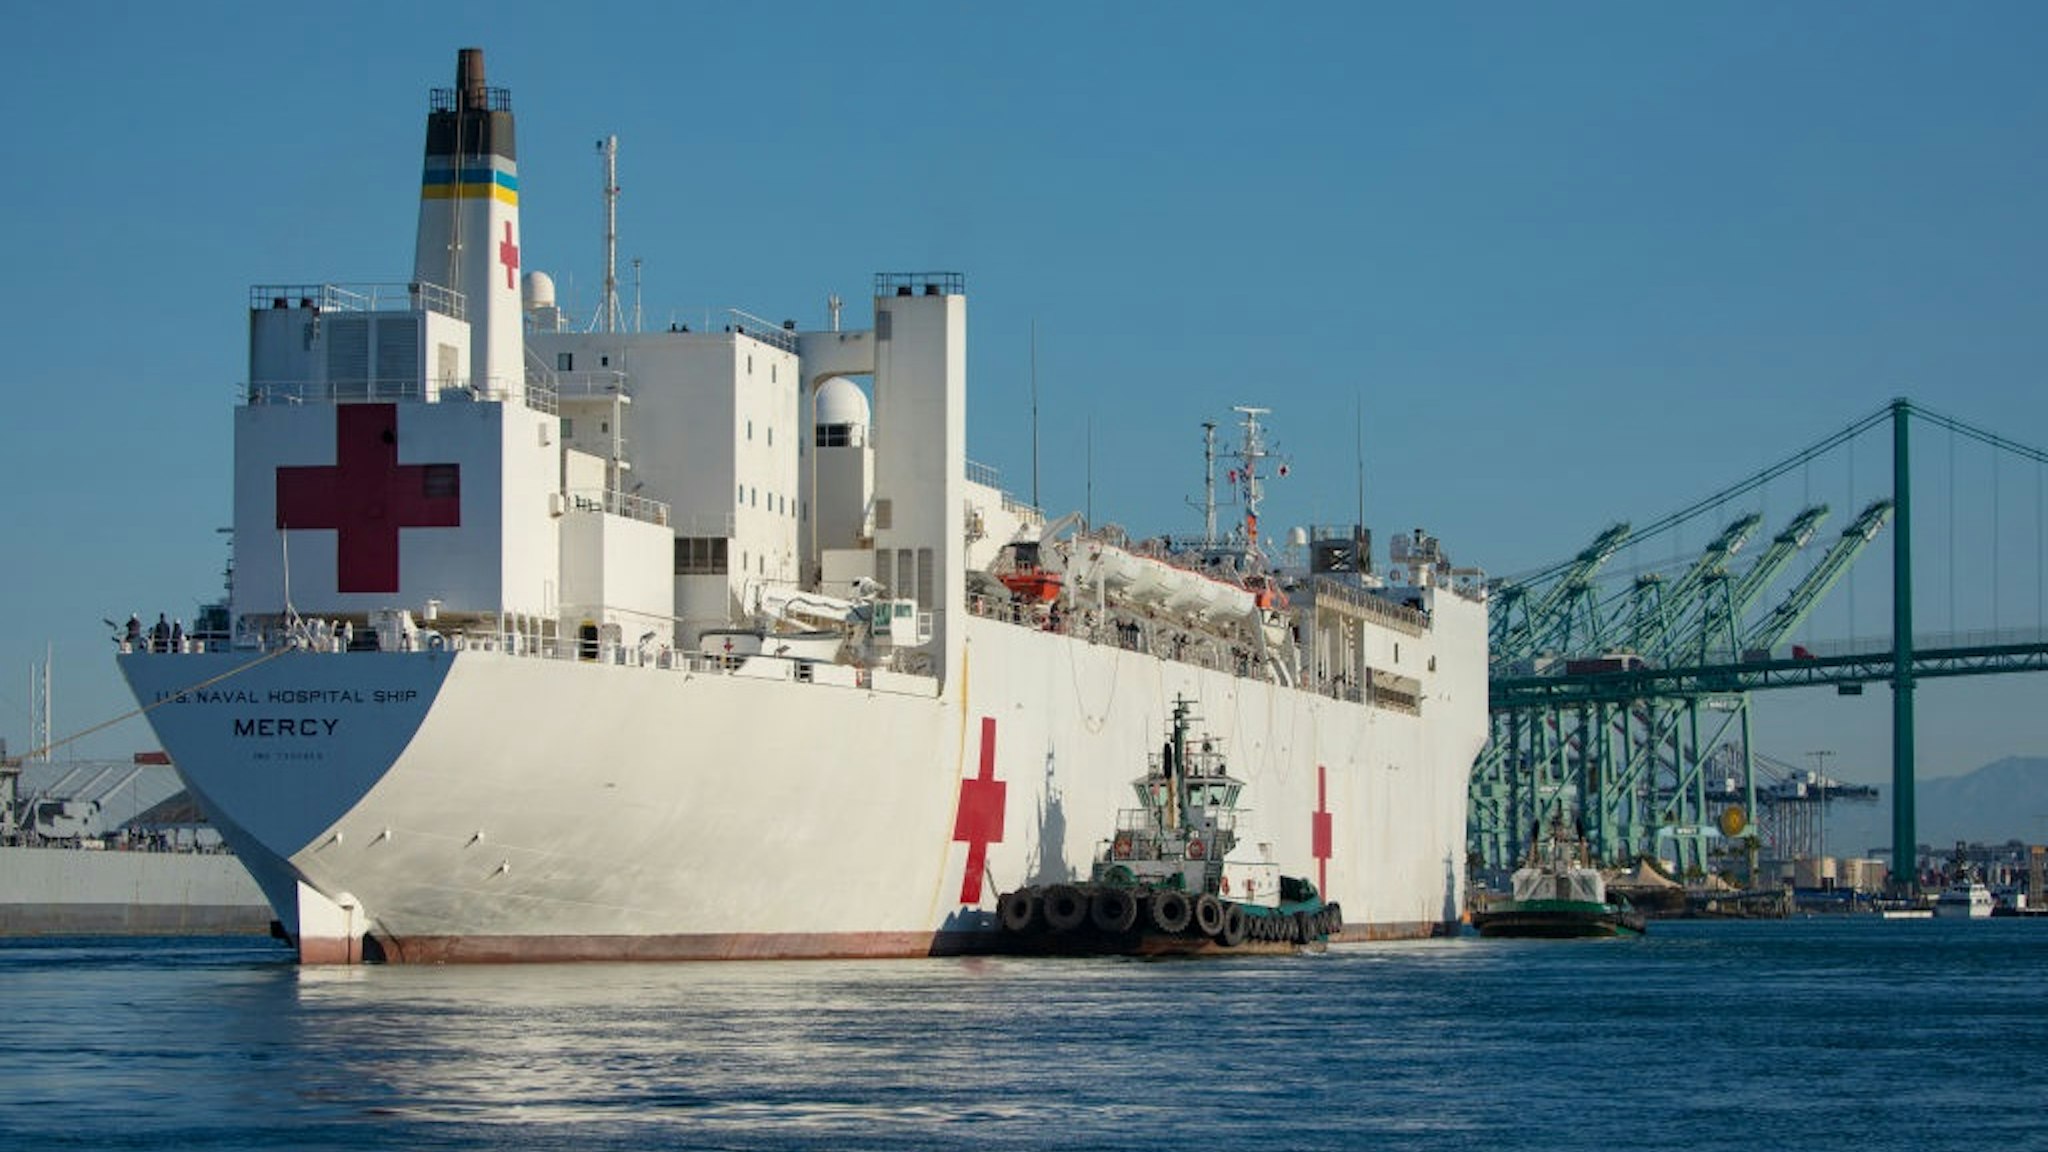 Tugboats guide the USNS Mercy hospital ship to moor at the Port of Los Angeles in Los Angeles, California, U.S., on Friday, March 27, 2020.